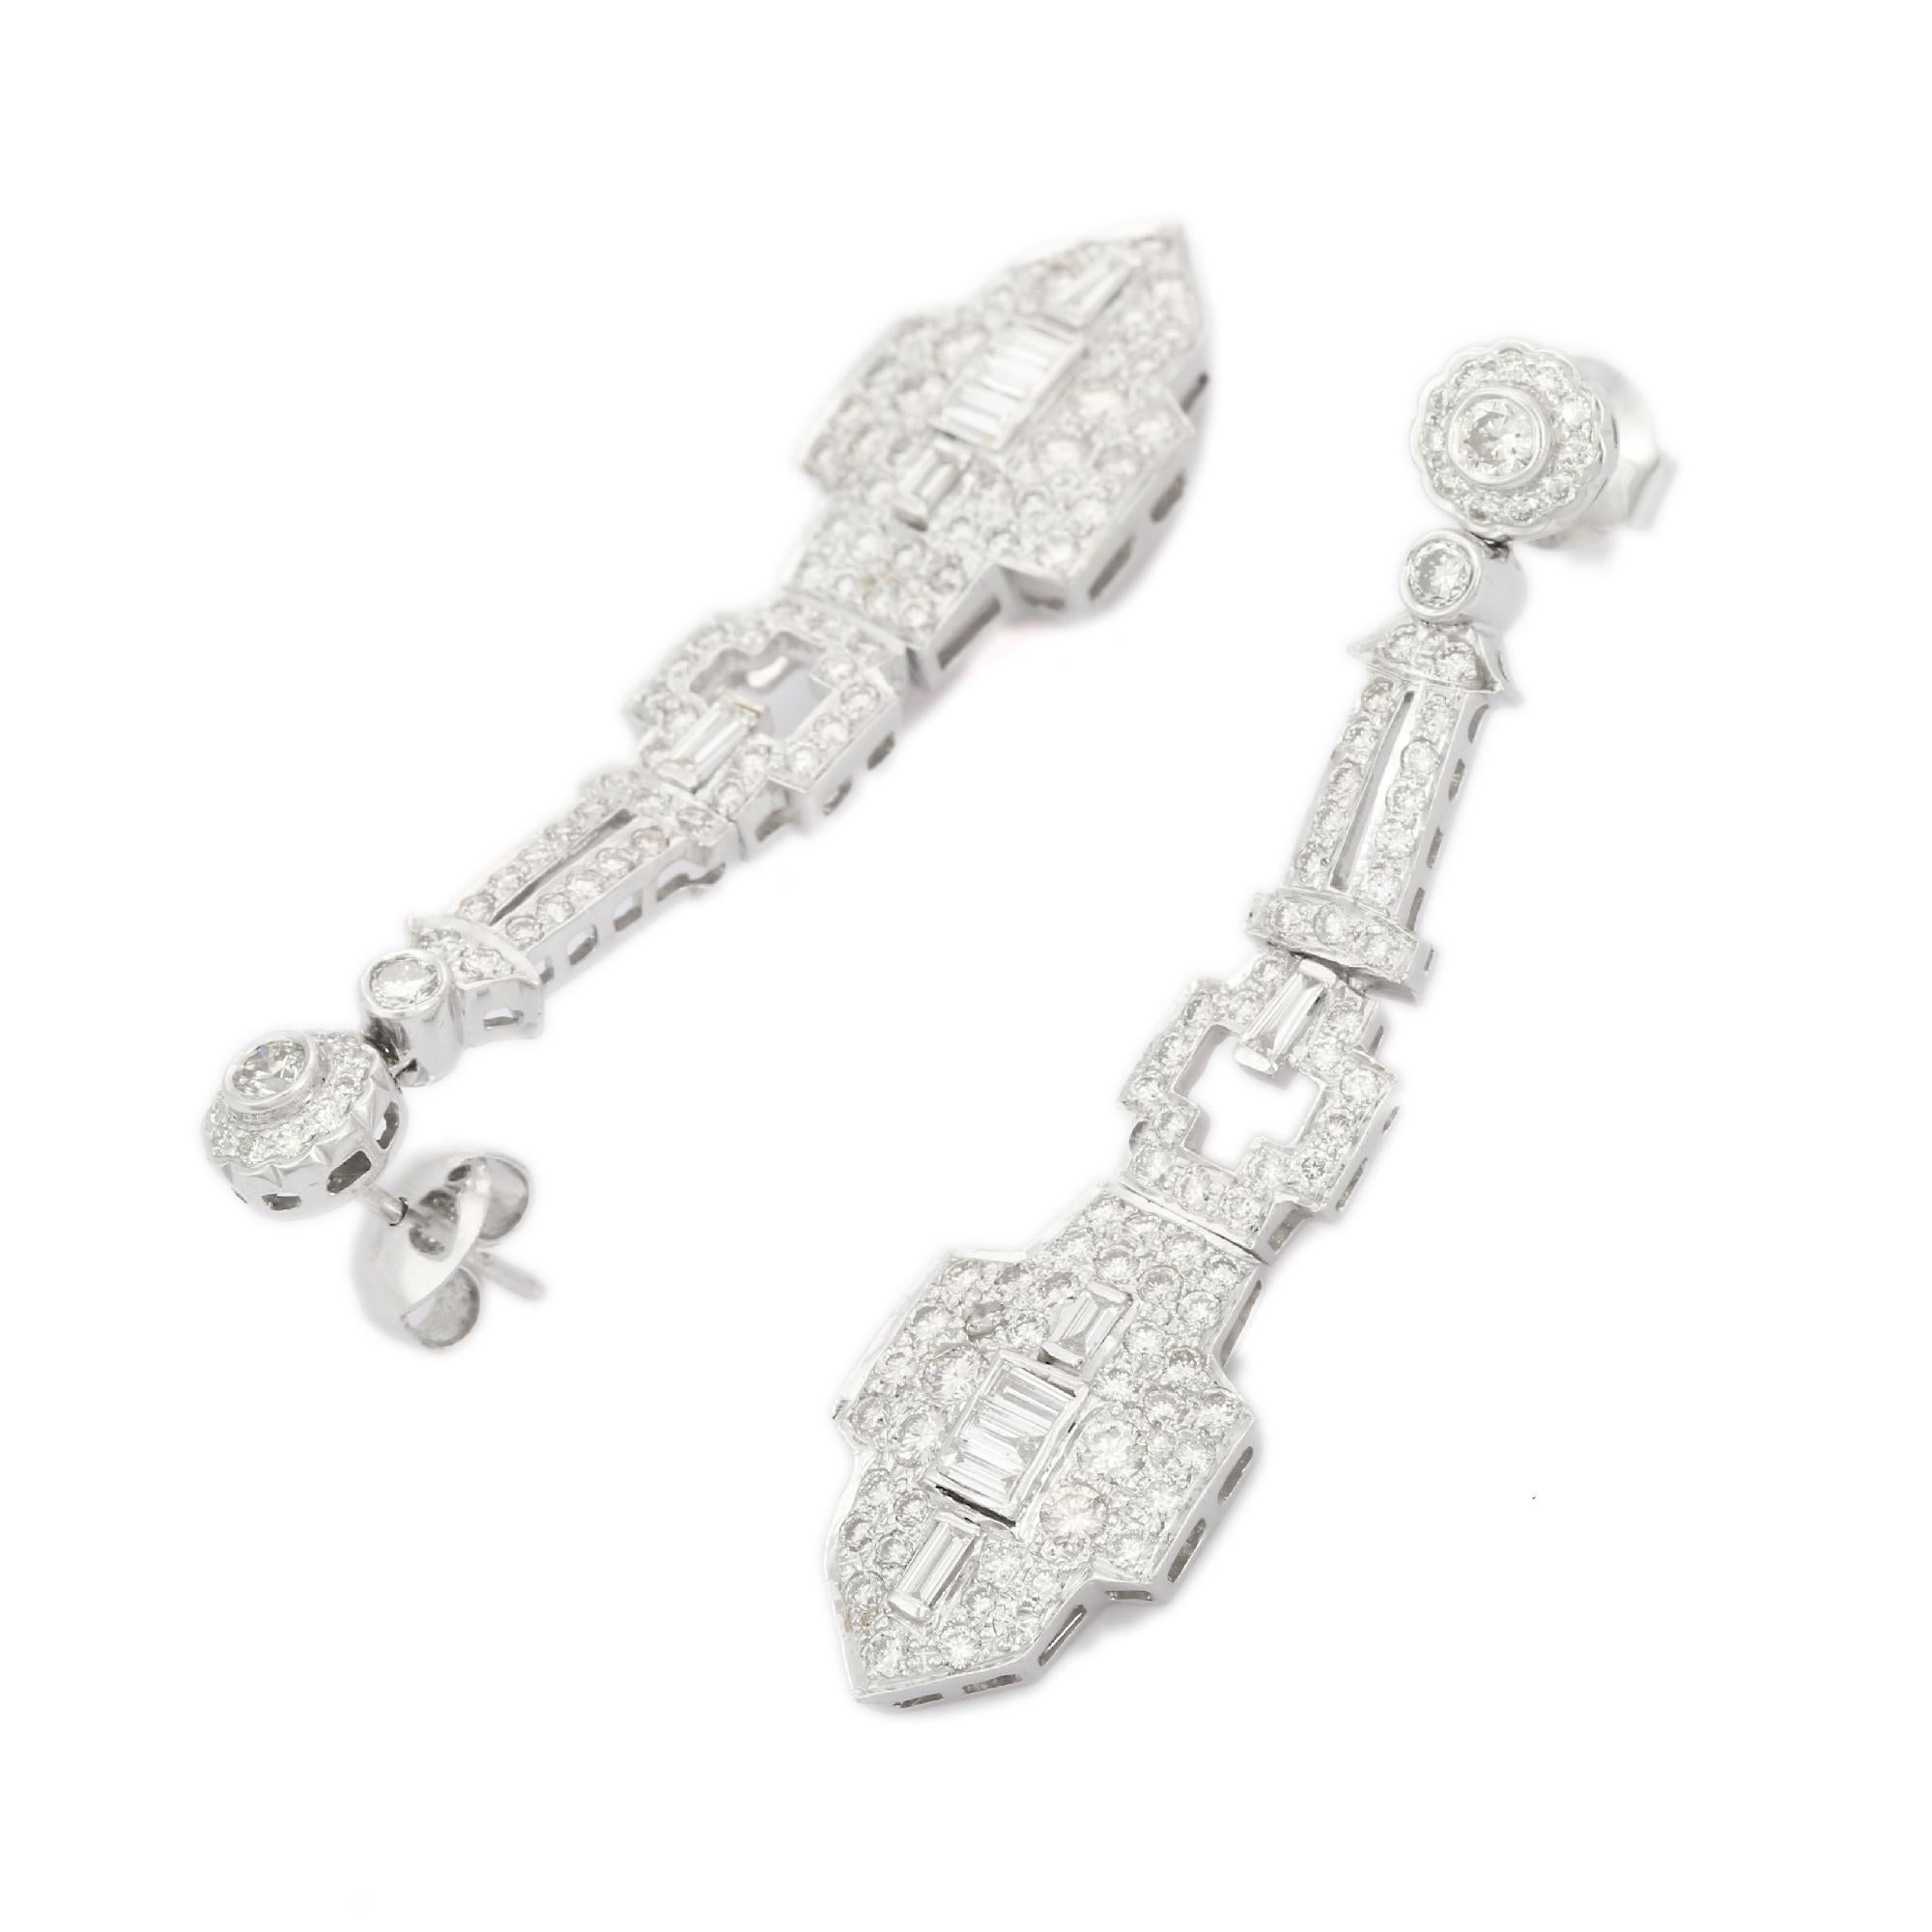 Contemporary Exquisite Art Deco Diamond Dangle Earrings in 18k White Gold For Sale